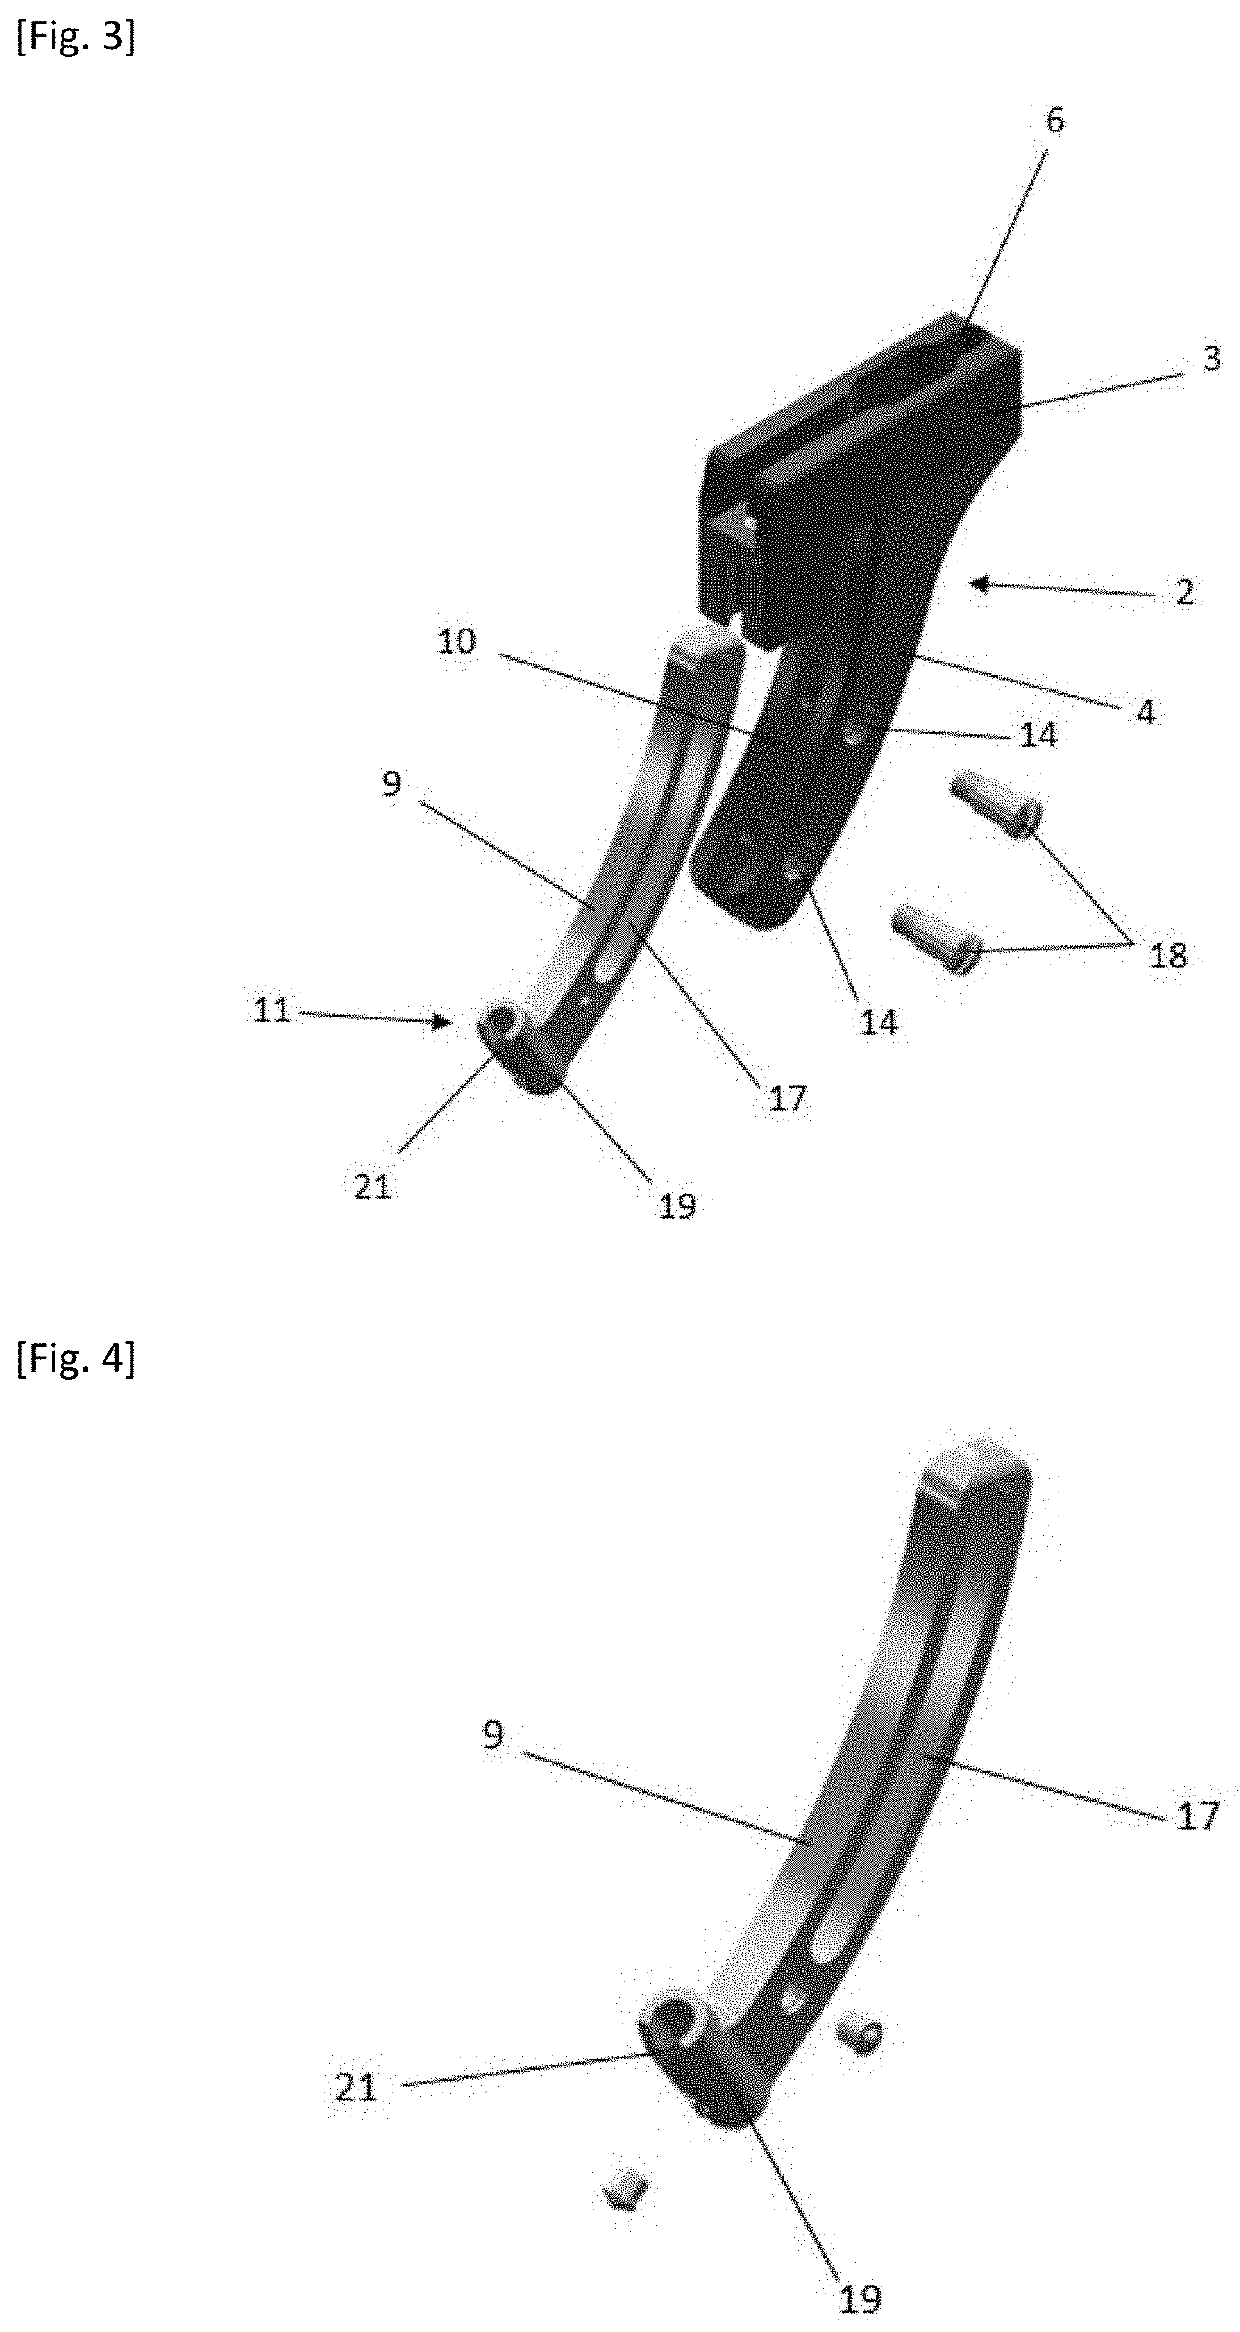 Reusable surgical guide for osteosynthesis surgery in particular of the hallux valgus